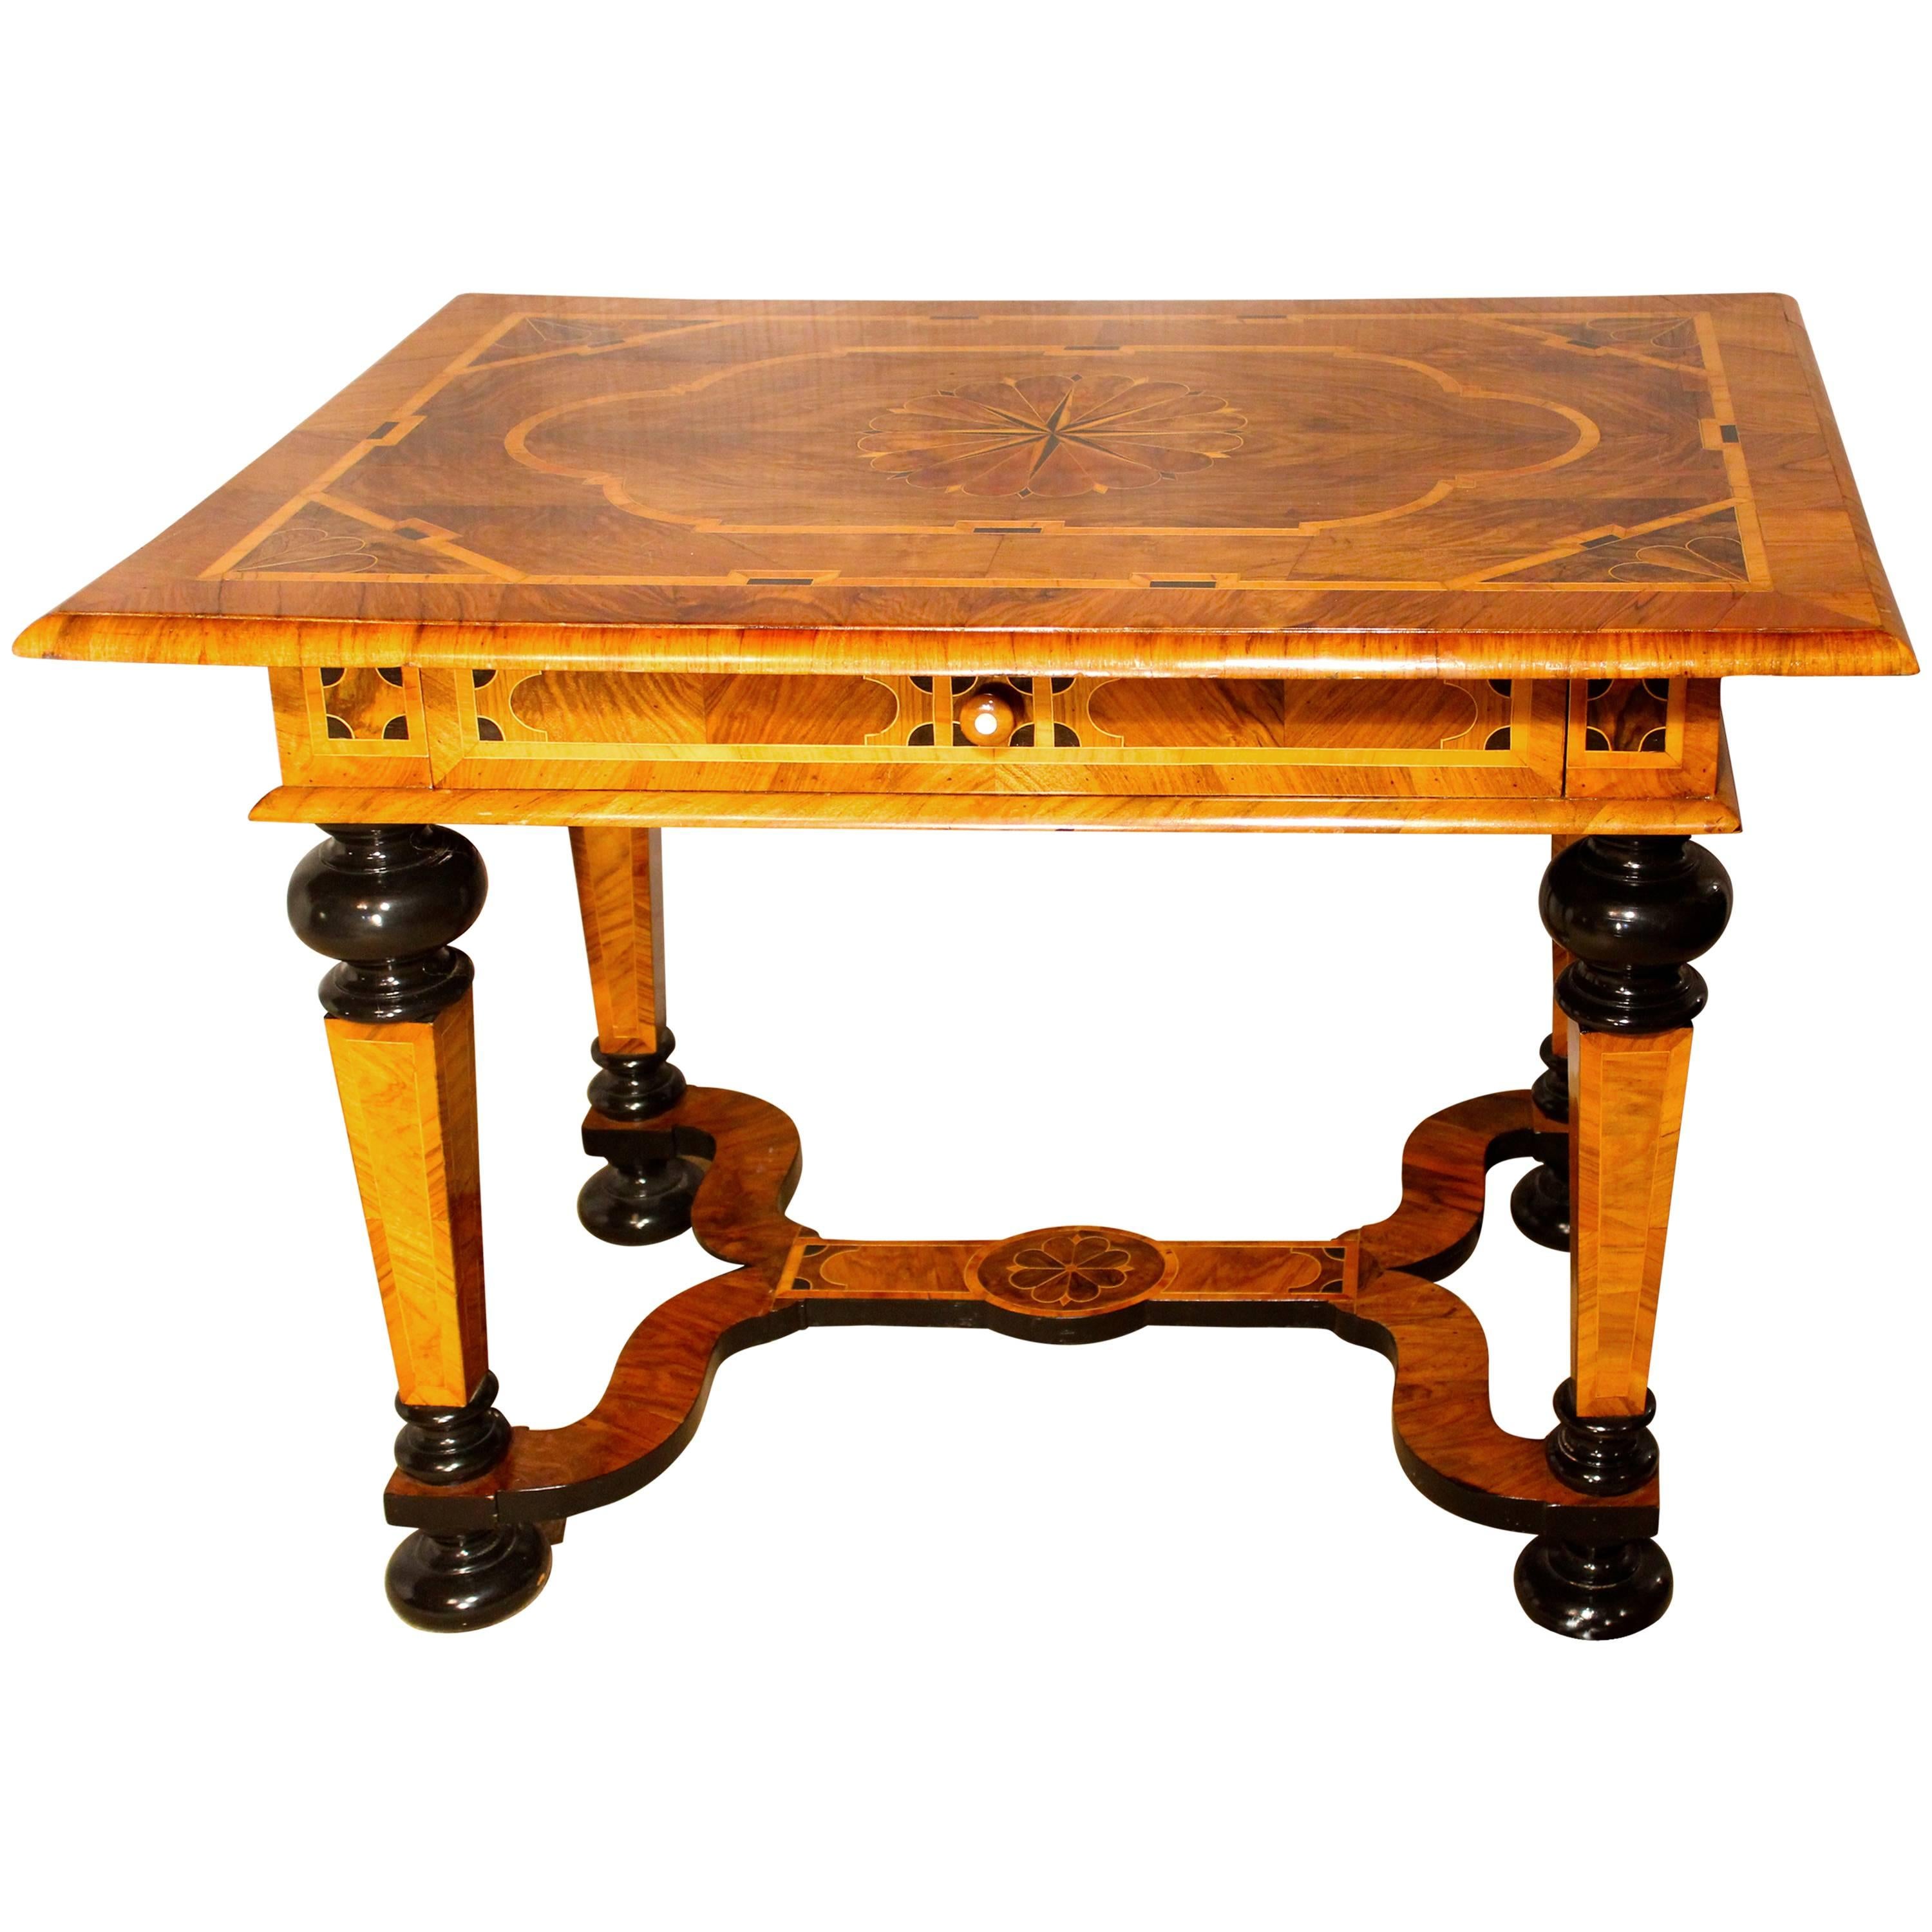 18th Century German Baroque Table For Sale